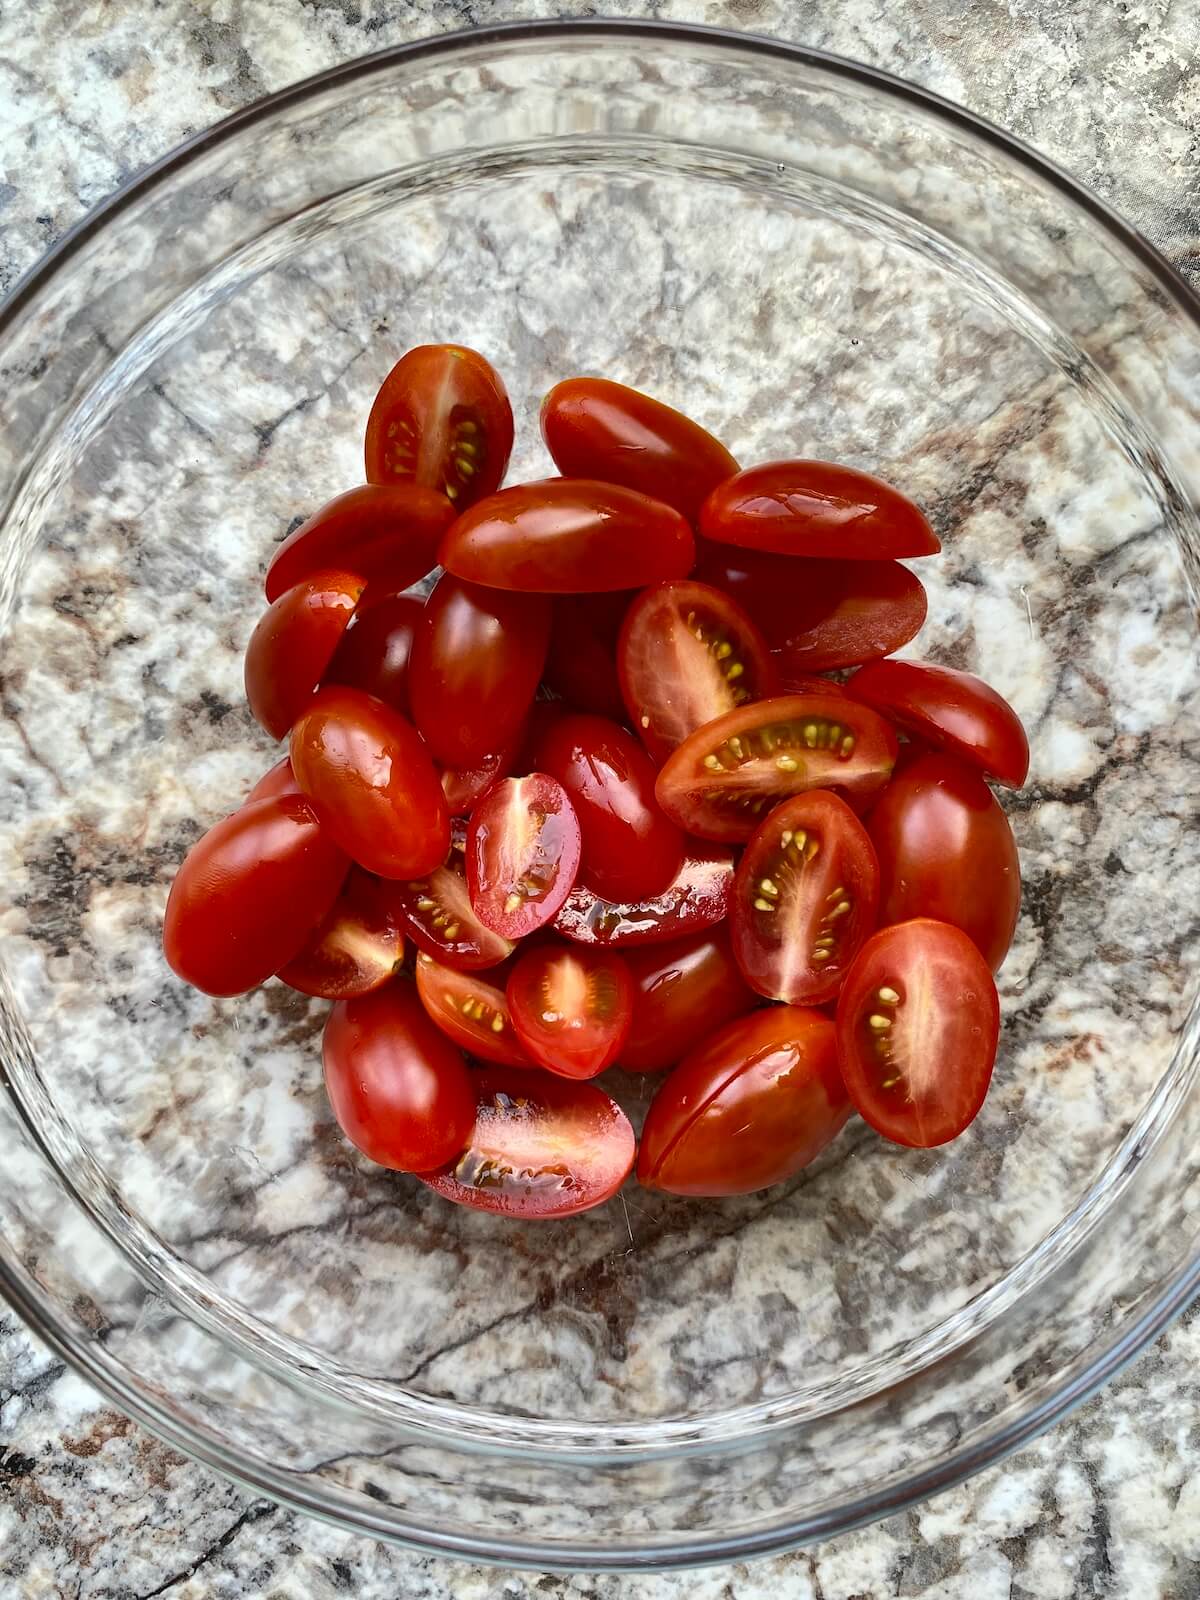 A clear glass bowl filled with rinsed and halved cherry tomatoes.